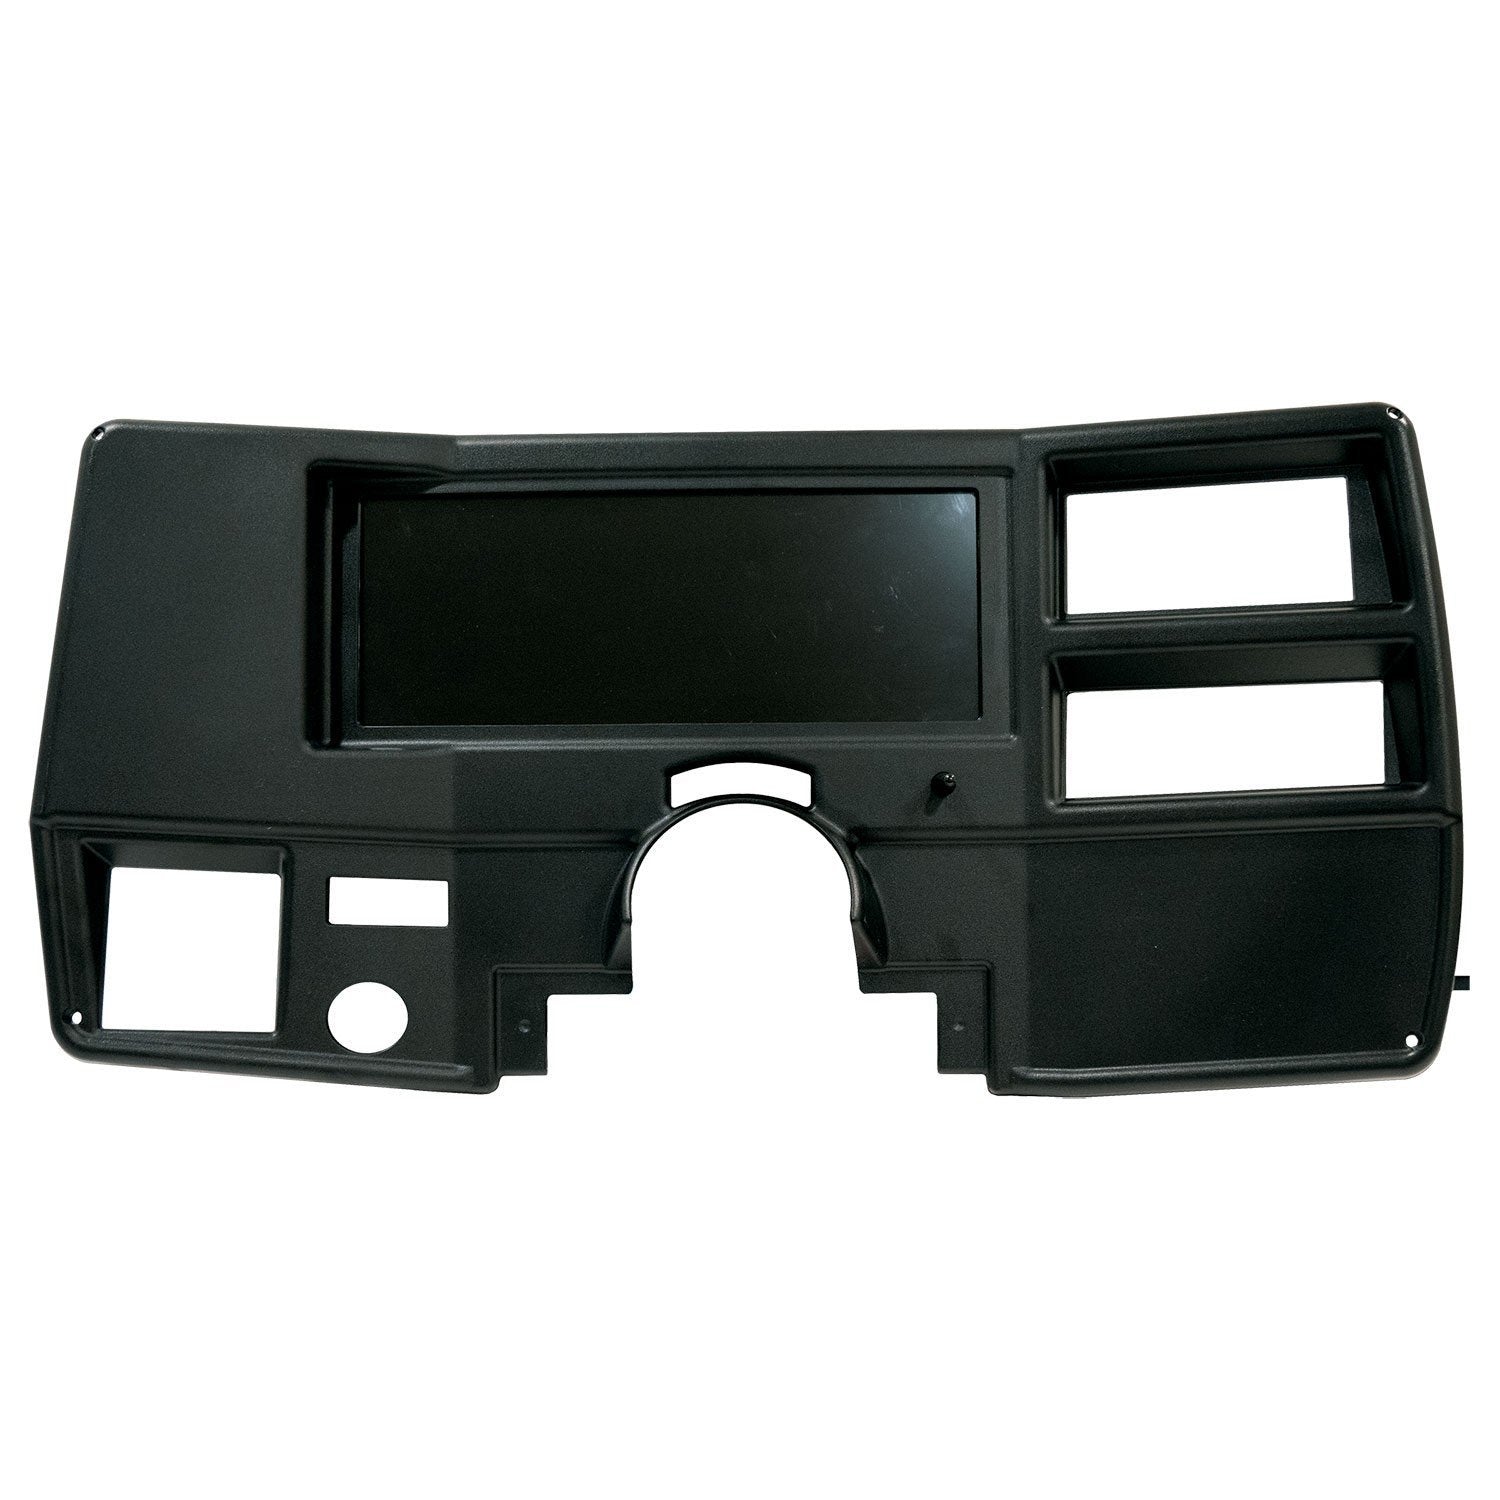 '73-87 Chevy/GMC Truck In-Vision Dash Kit Interior Accessoires Autometer display